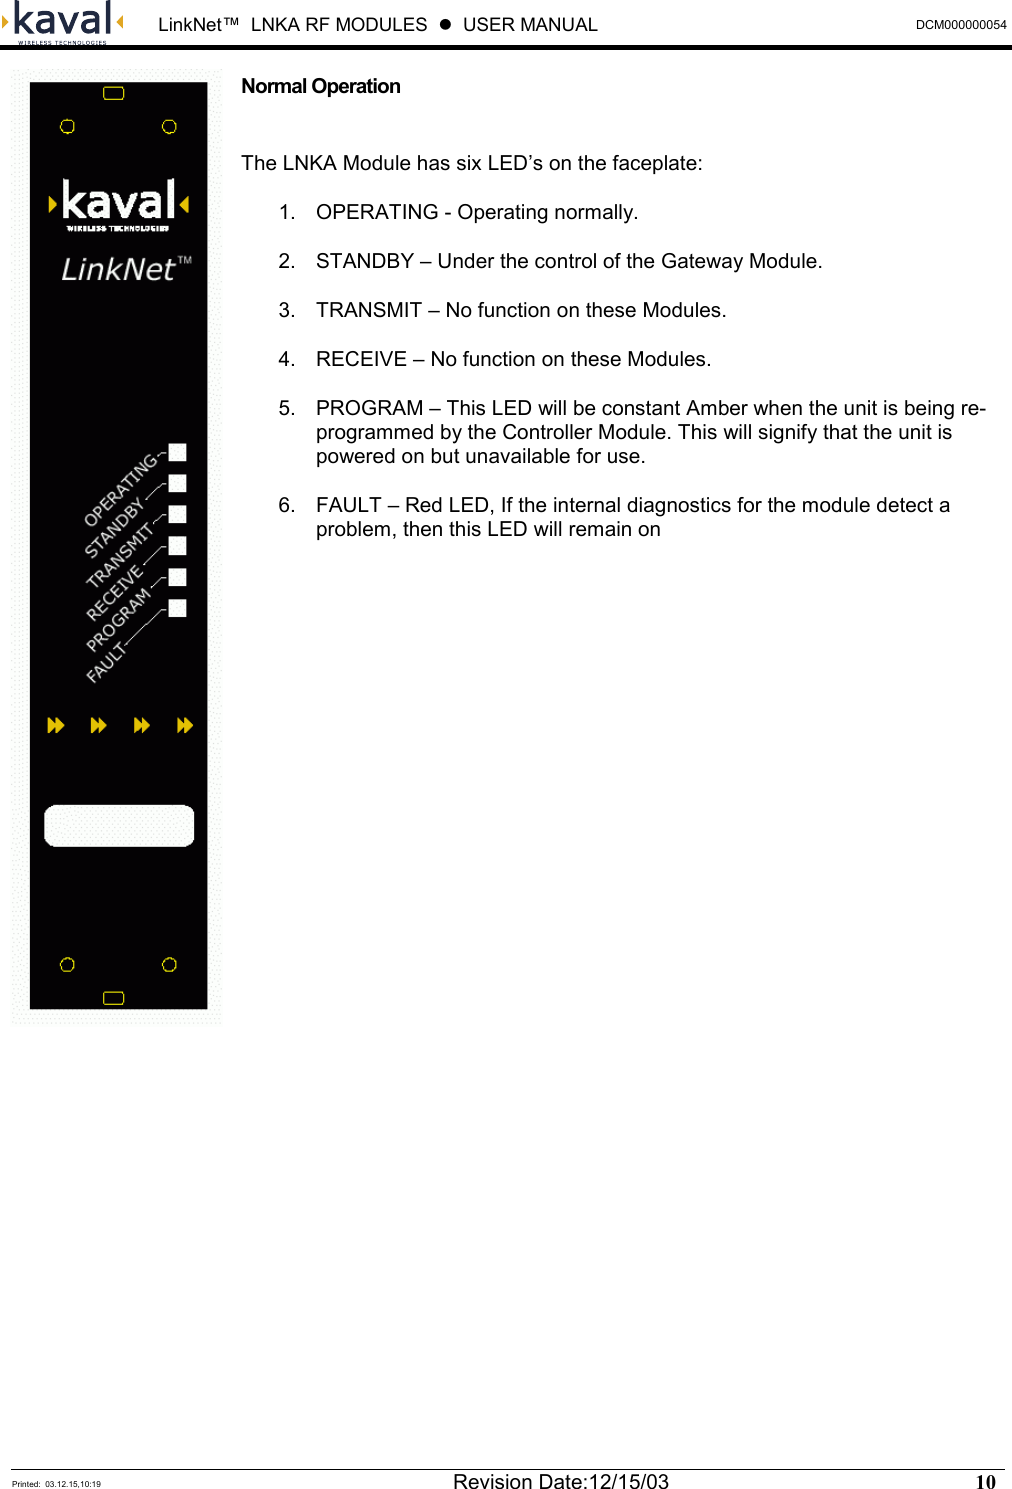  LinkNet™  LNKA RF MODULES  z  USER MANUAL  DCM000000054  Printed:  03.12.15,10:19  Revision Date:12/15/03   10   Normal Operation  The LNKA Module has six LED’s on the faceplate: 1.  OPERATING - Operating normally. 2.  STANDBY – Under the control of the Gateway Module. 3.  TRANSMIT – No function on these Modules. 4.  RECEIVE – No function on these Modules. 5.  PROGRAM – This LED will be constant Amber when the unit is being re-programmed by the Controller Module. This will signify that the unit is powered on but unavailable for use. 6.  FAULT – Red LED, If the internal diagnostics for the module detect a problem, then this LED will remain on               